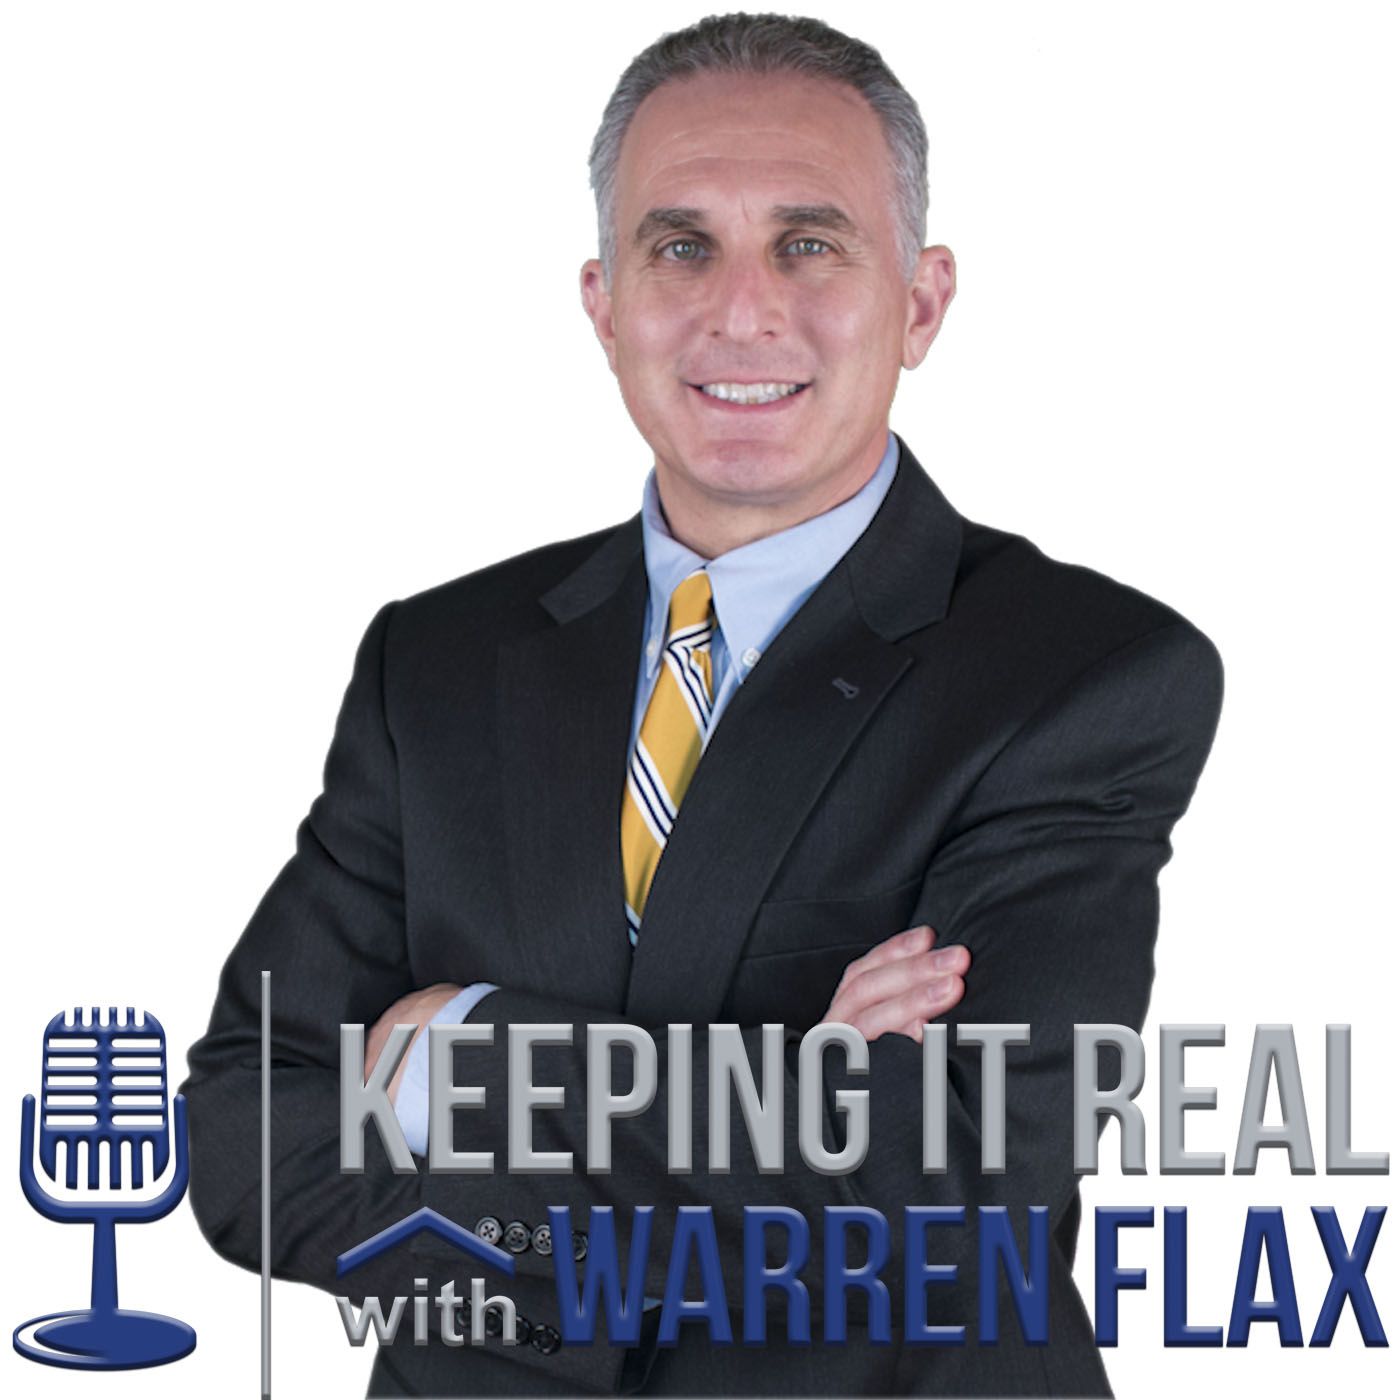 Keep it Real with Warren Flax